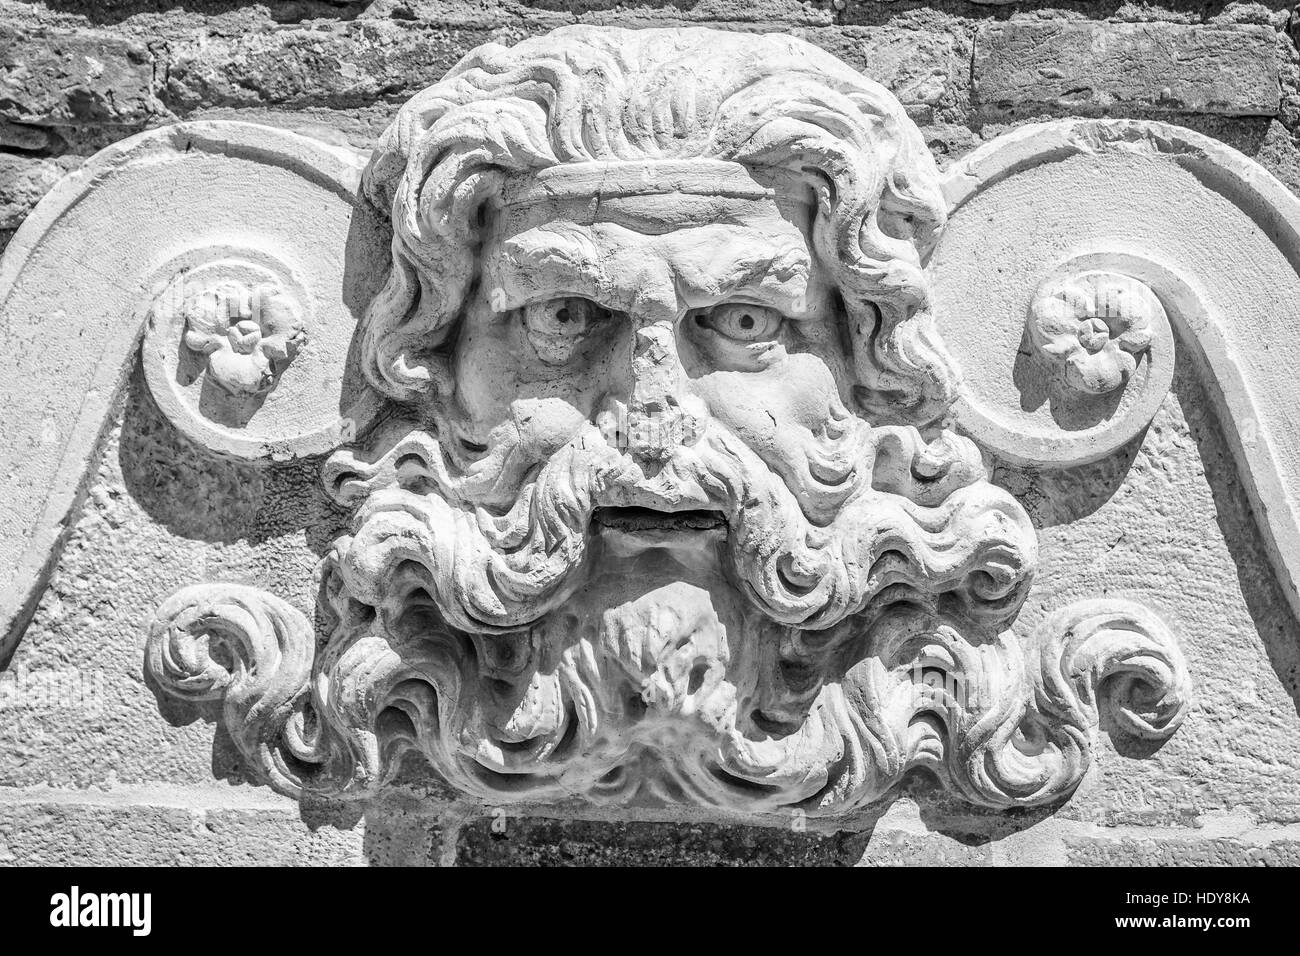 Detail of an ancient stone fountain depicting the god Neptune from whose mouth the water came out. Stock Photo